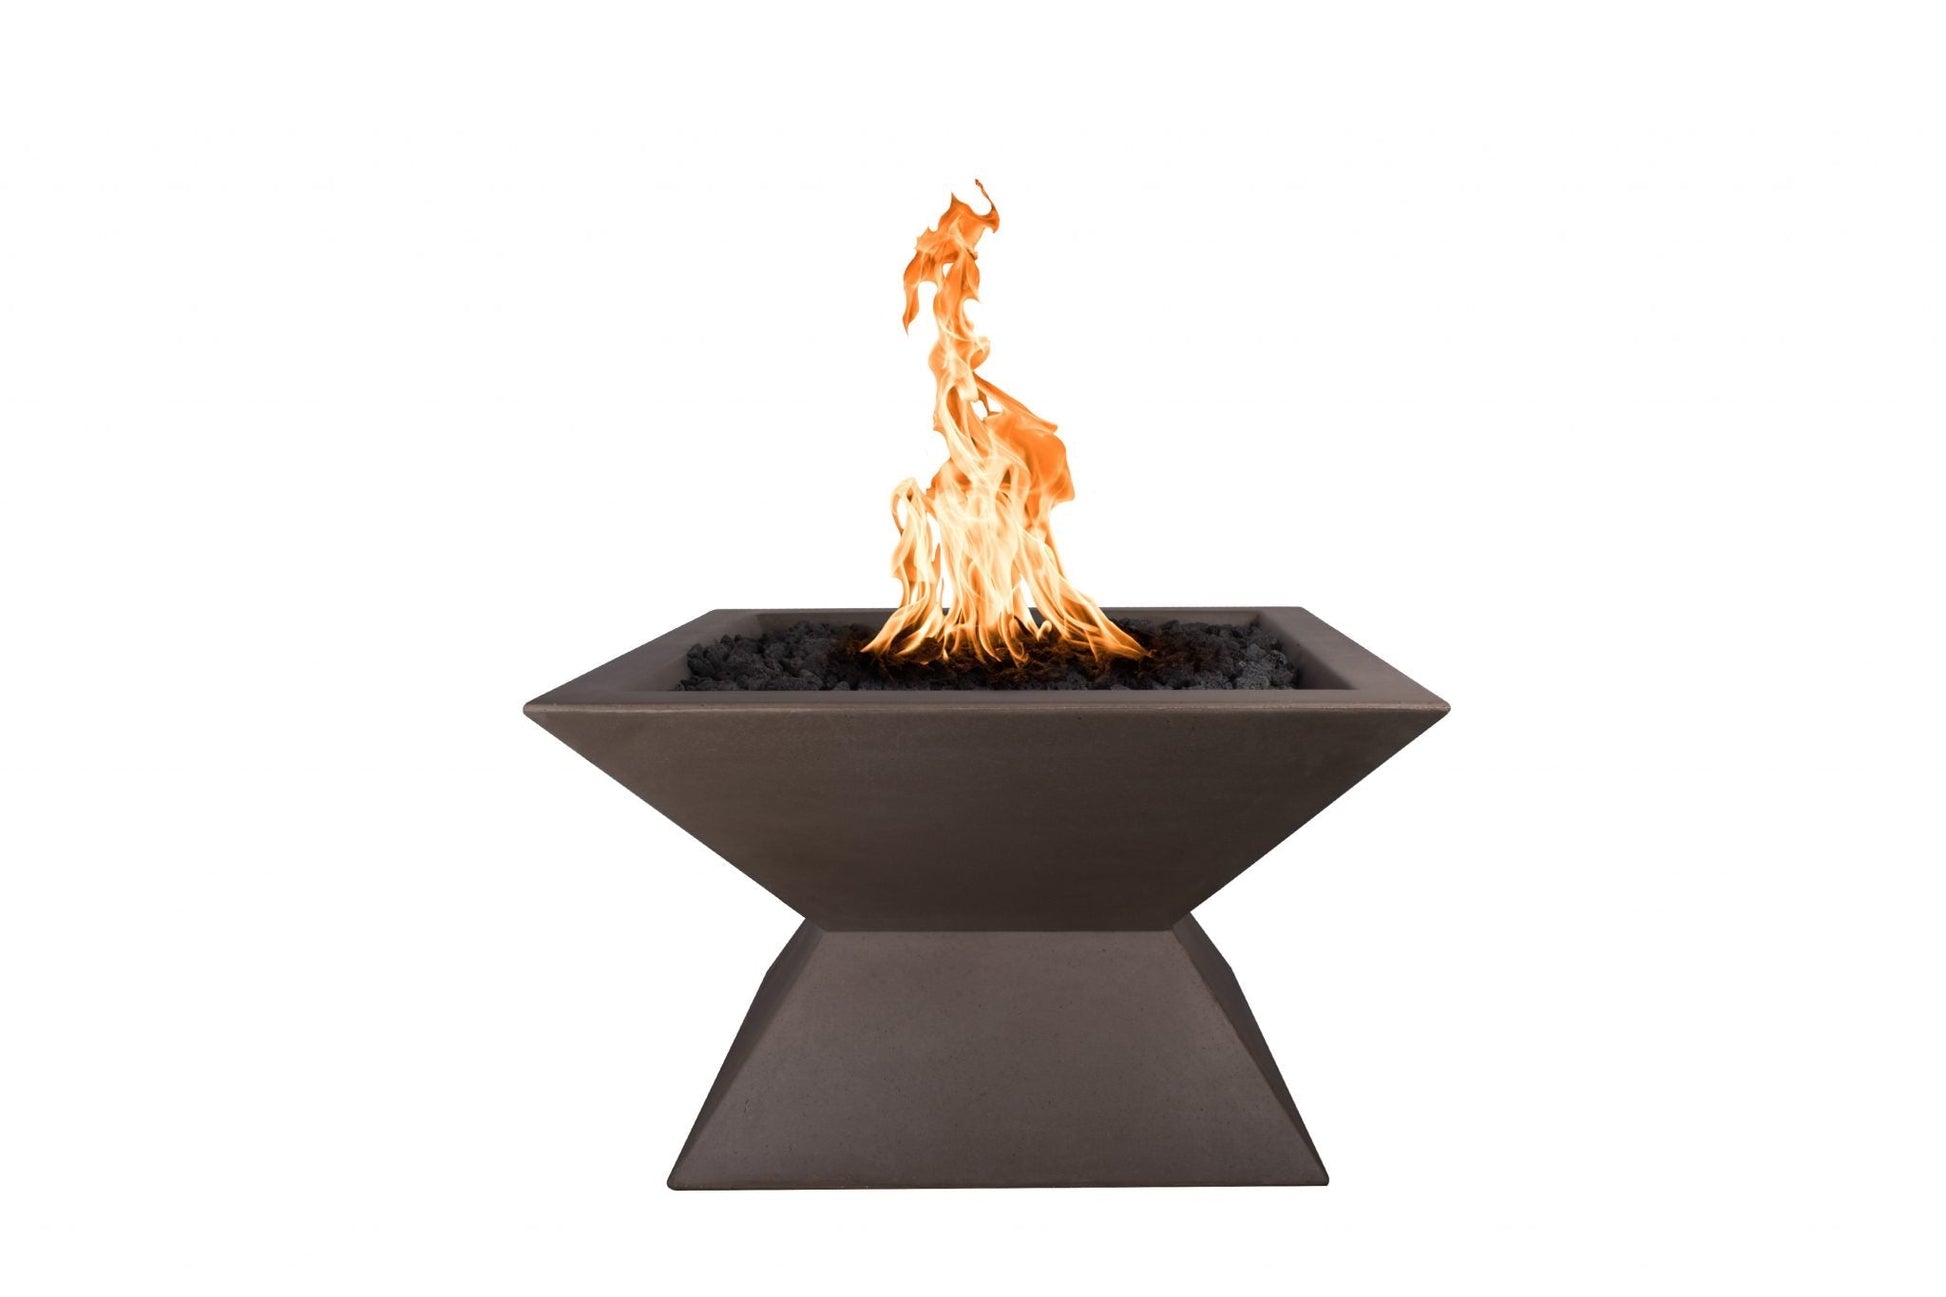 The Outdoor Plus Square Uxmal 30" Gray GFRC Concrete Liquid Propane Fire Pit with Match Lit Ignition